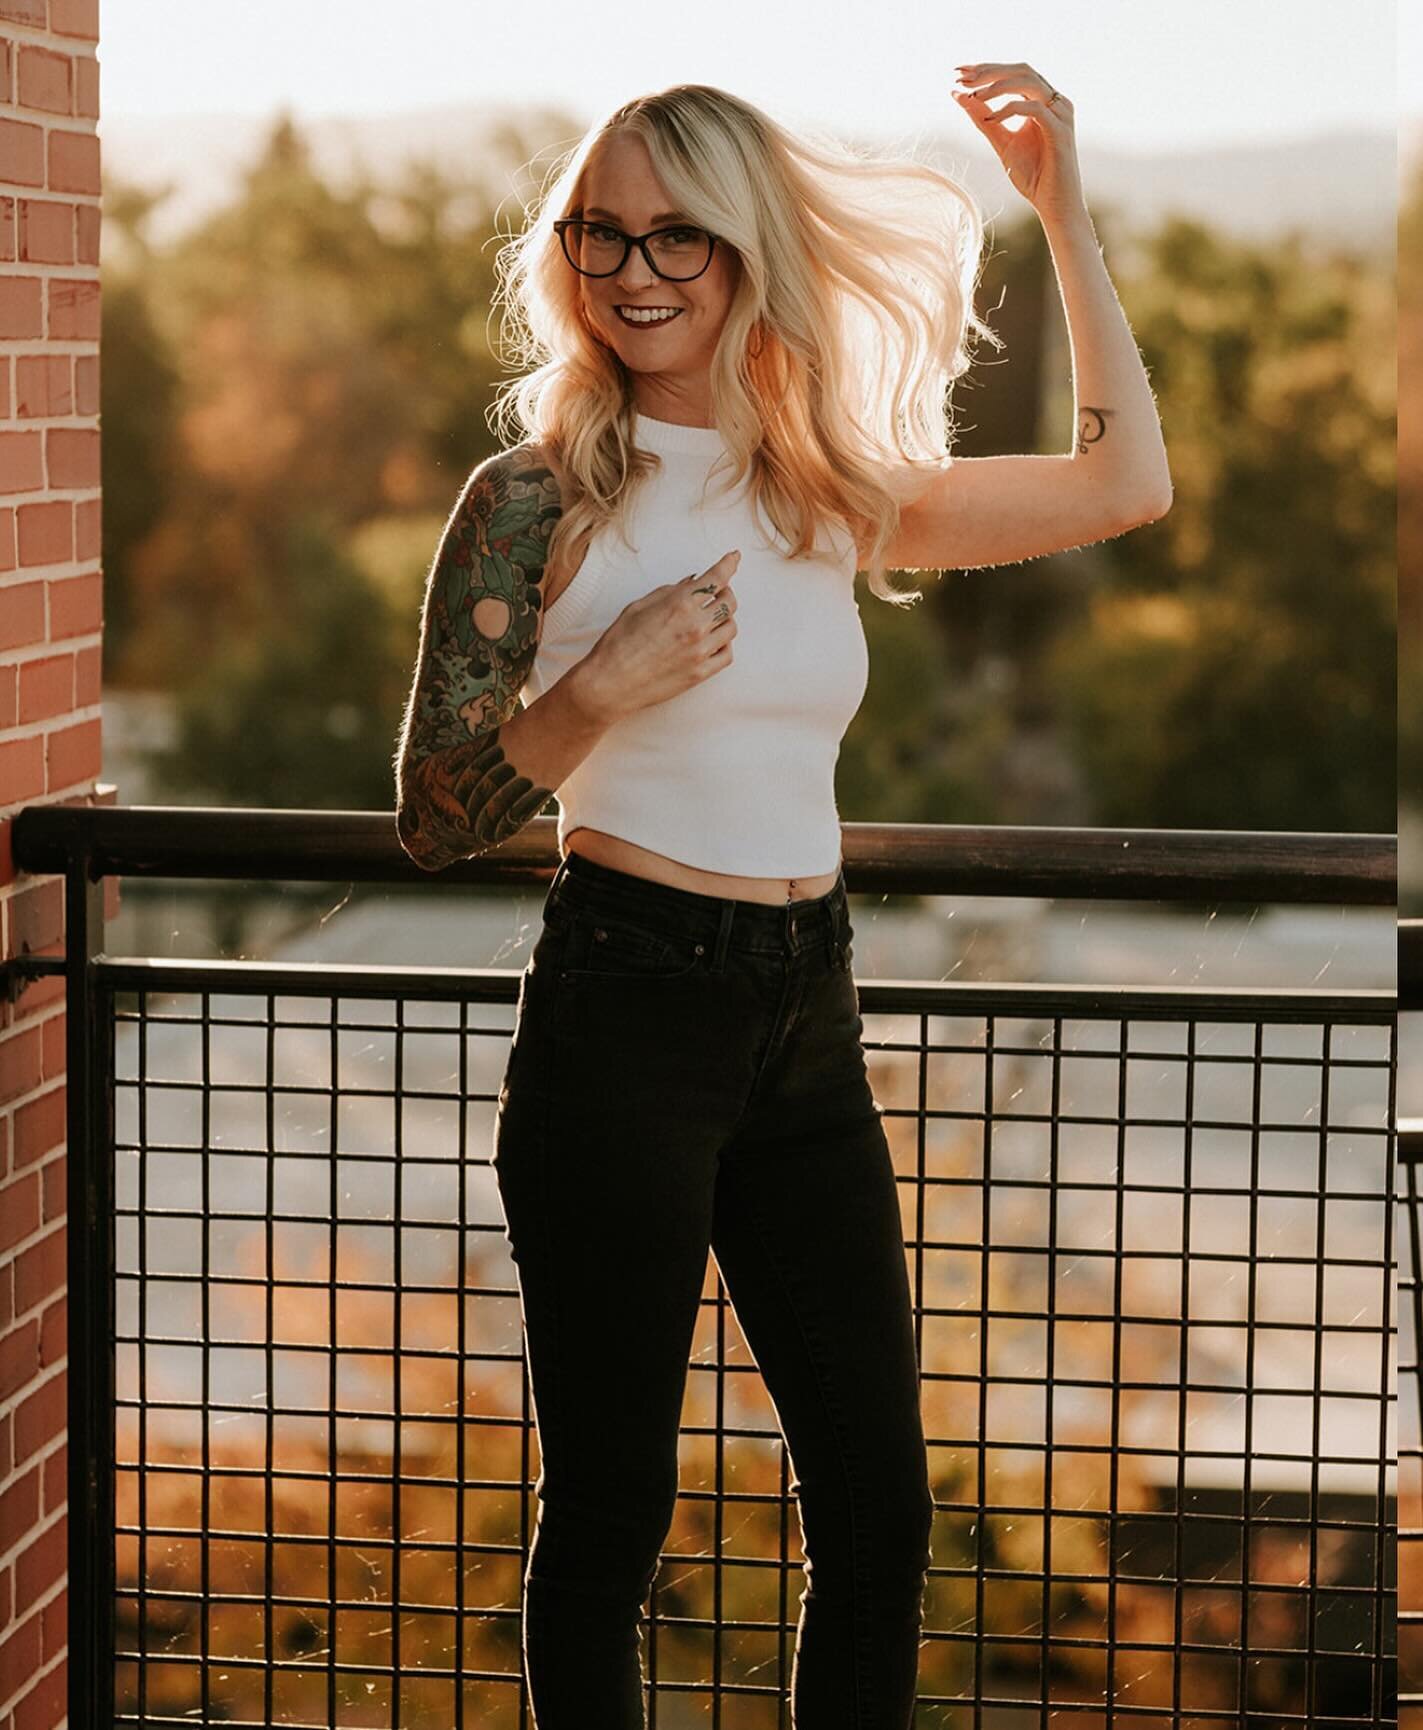 🎉HAPPY 5️⃣ YEAR SALON-IVERSARY SAGE!!!🎉 We are all incredibly honored and lucky to have a coworker like you by our side! Sage brings a special baddie energy to the salon that inspires others to be driven and work hard. Help us celebrate this specia